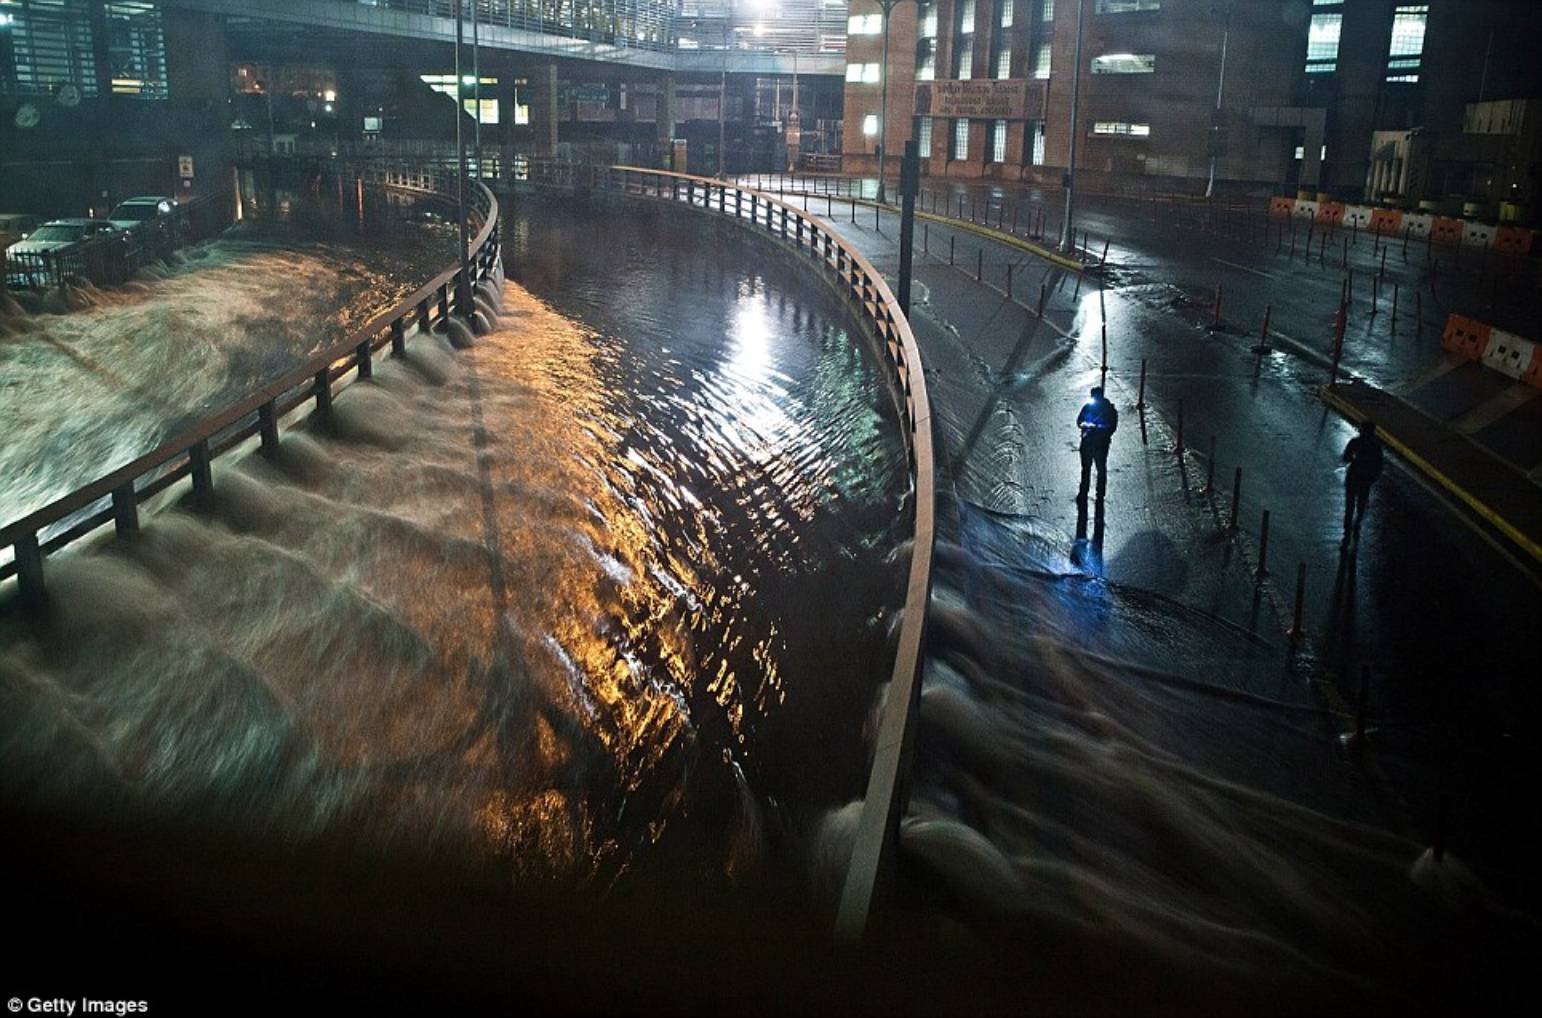 Flooding: Water rushes into the Carey Tunnel (previously the Brooklyn Battery Tunnel), caused by Sandy on Monday night in the financial district of New York